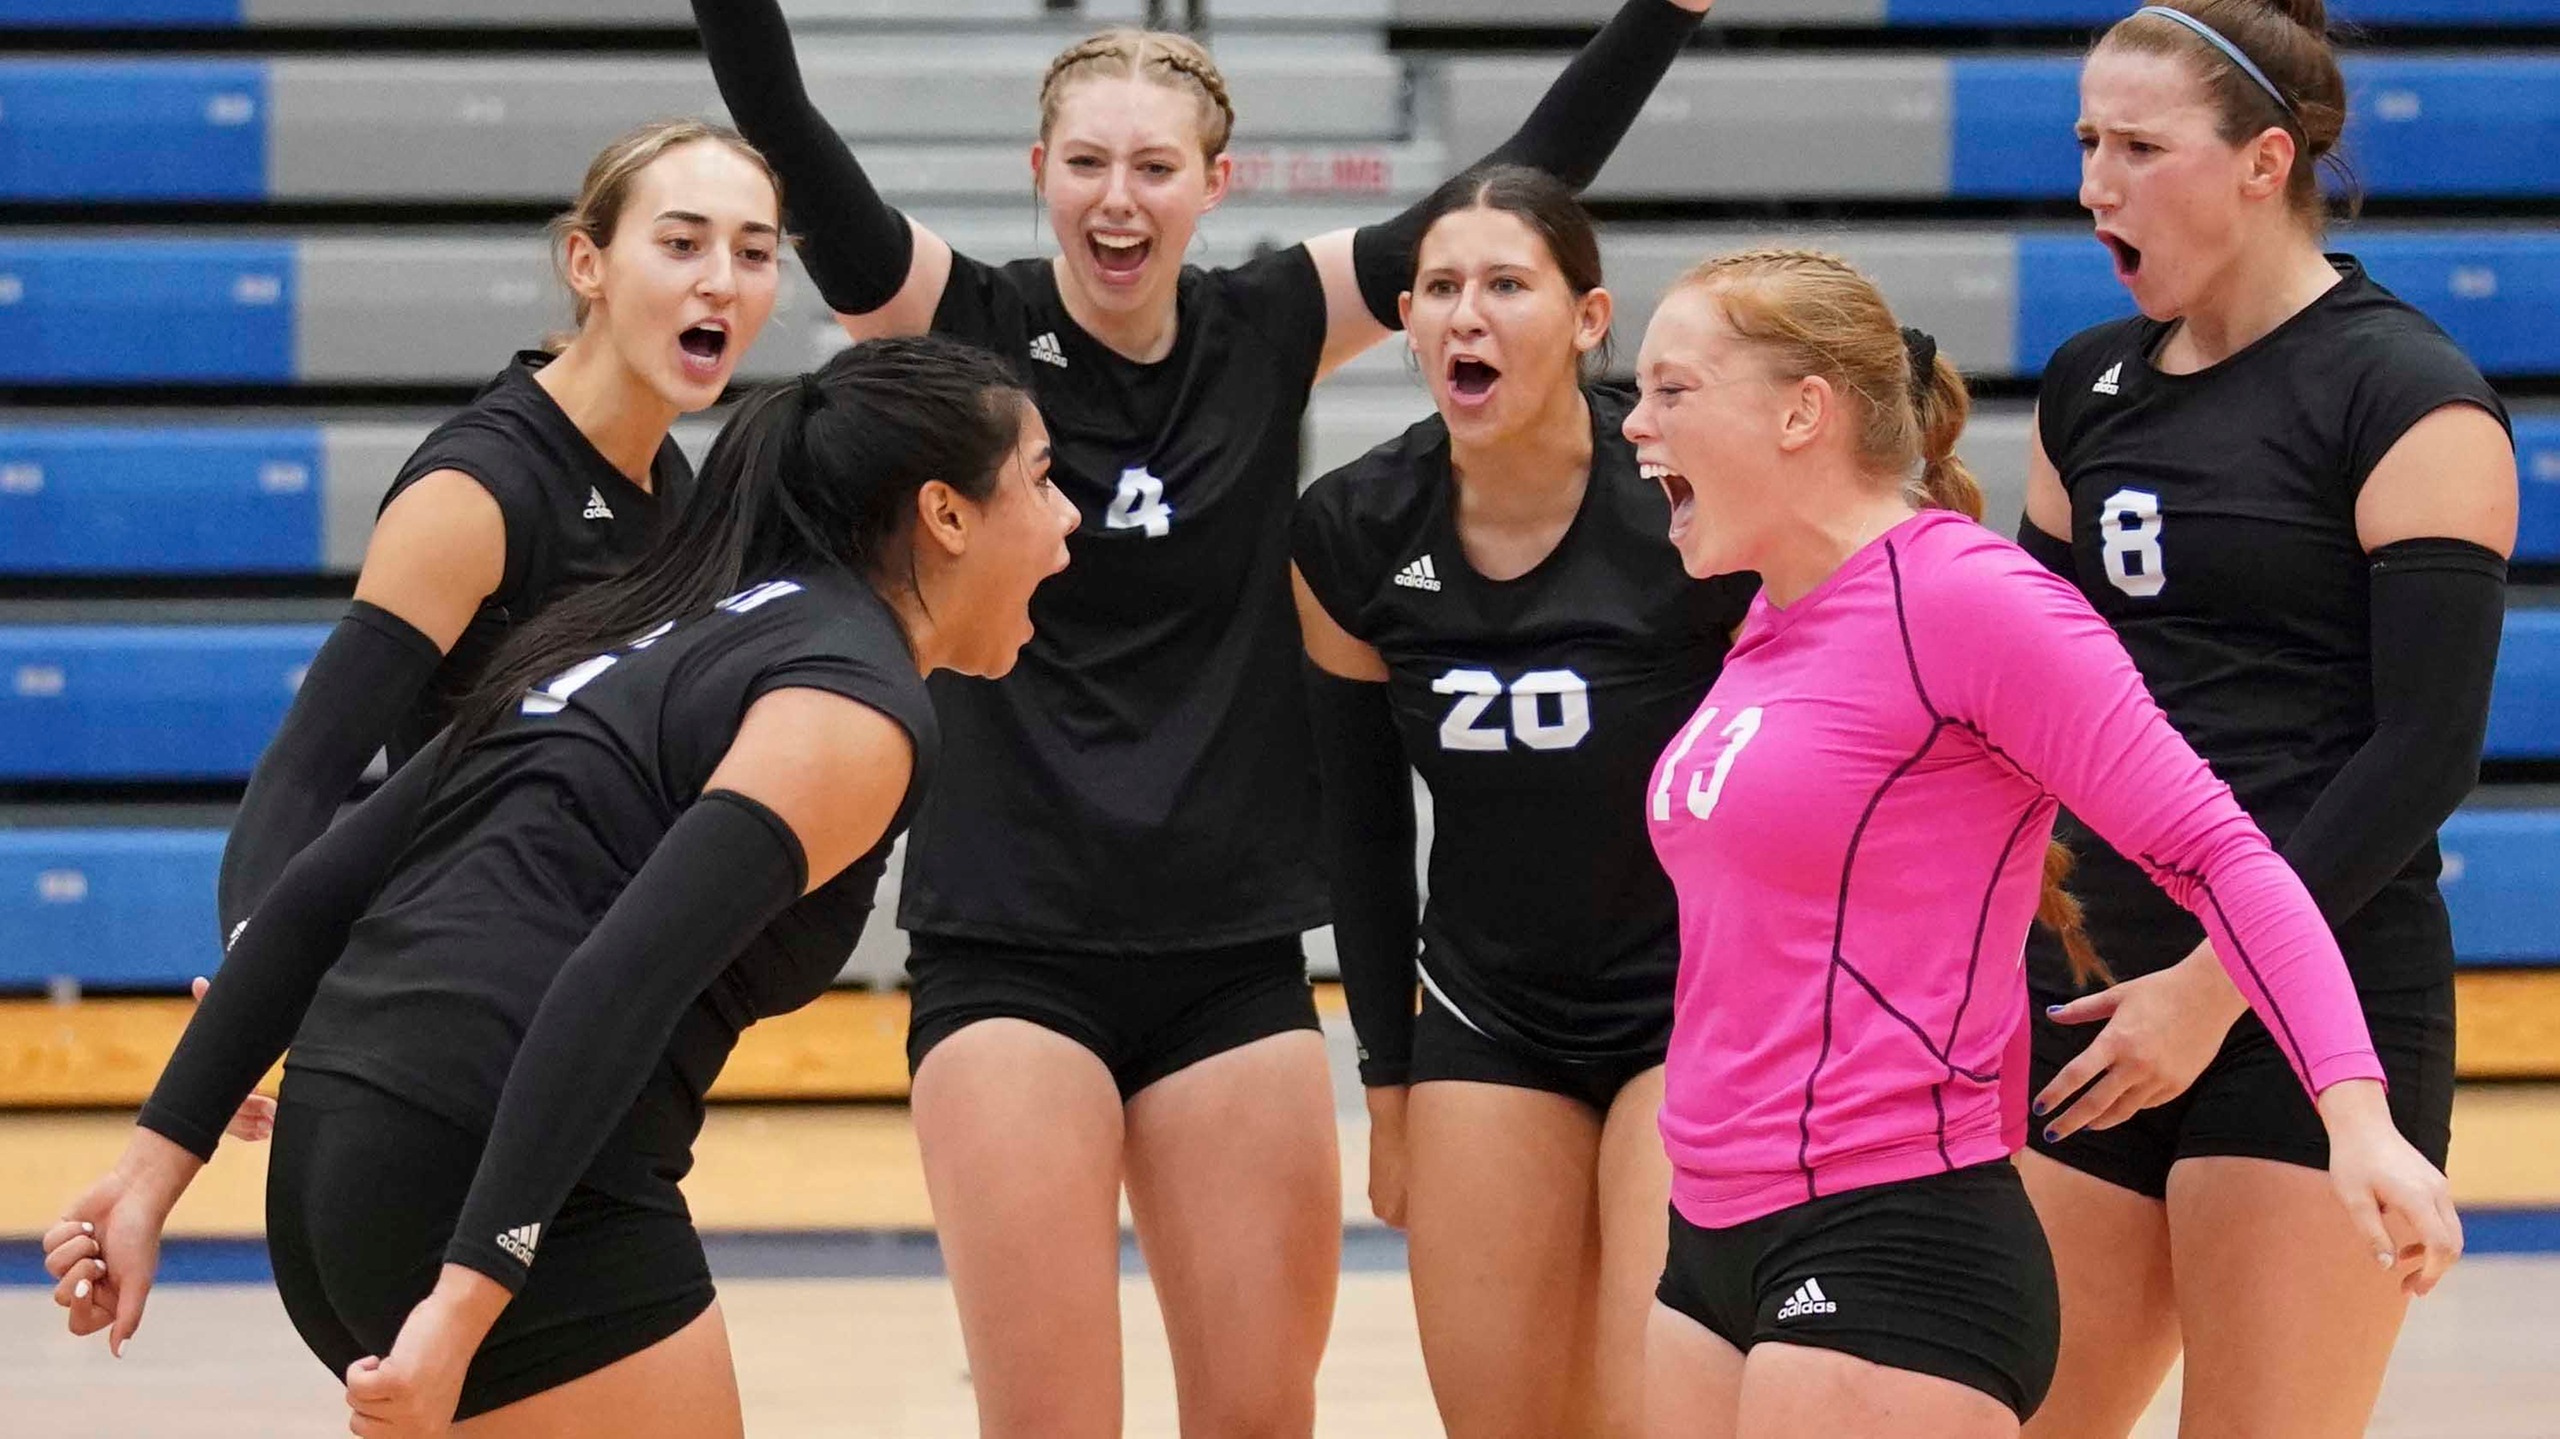 MCC Volleyball to play LCCC in tournament opener Wednesday